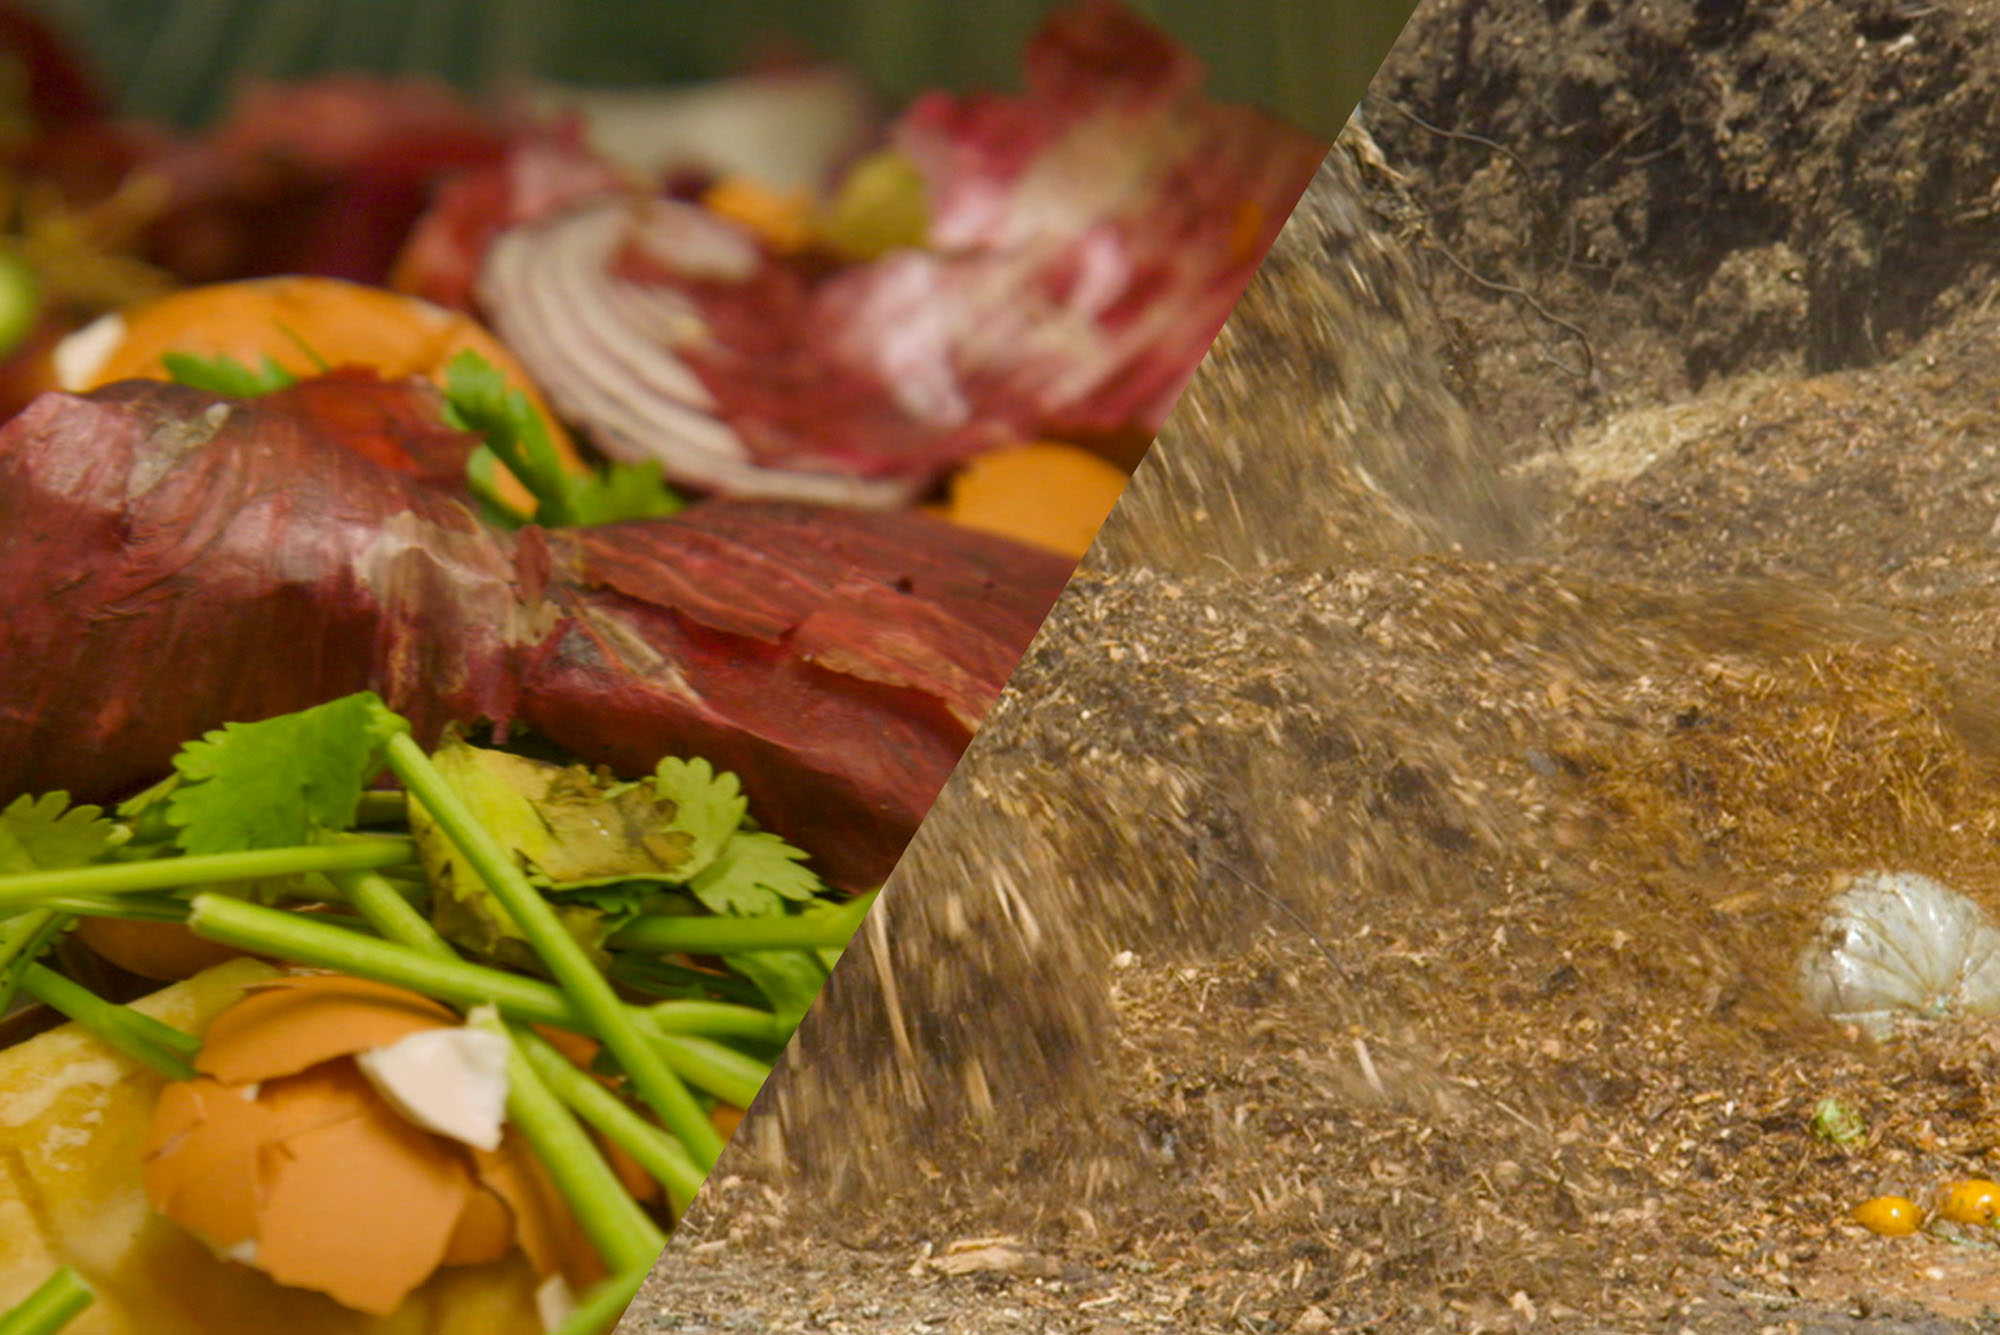 Collage: Left photo shows a pile of raw food including slabs of meat and veggies. The right photo shows piles of dirt. The photos are split diagonally in the middle.